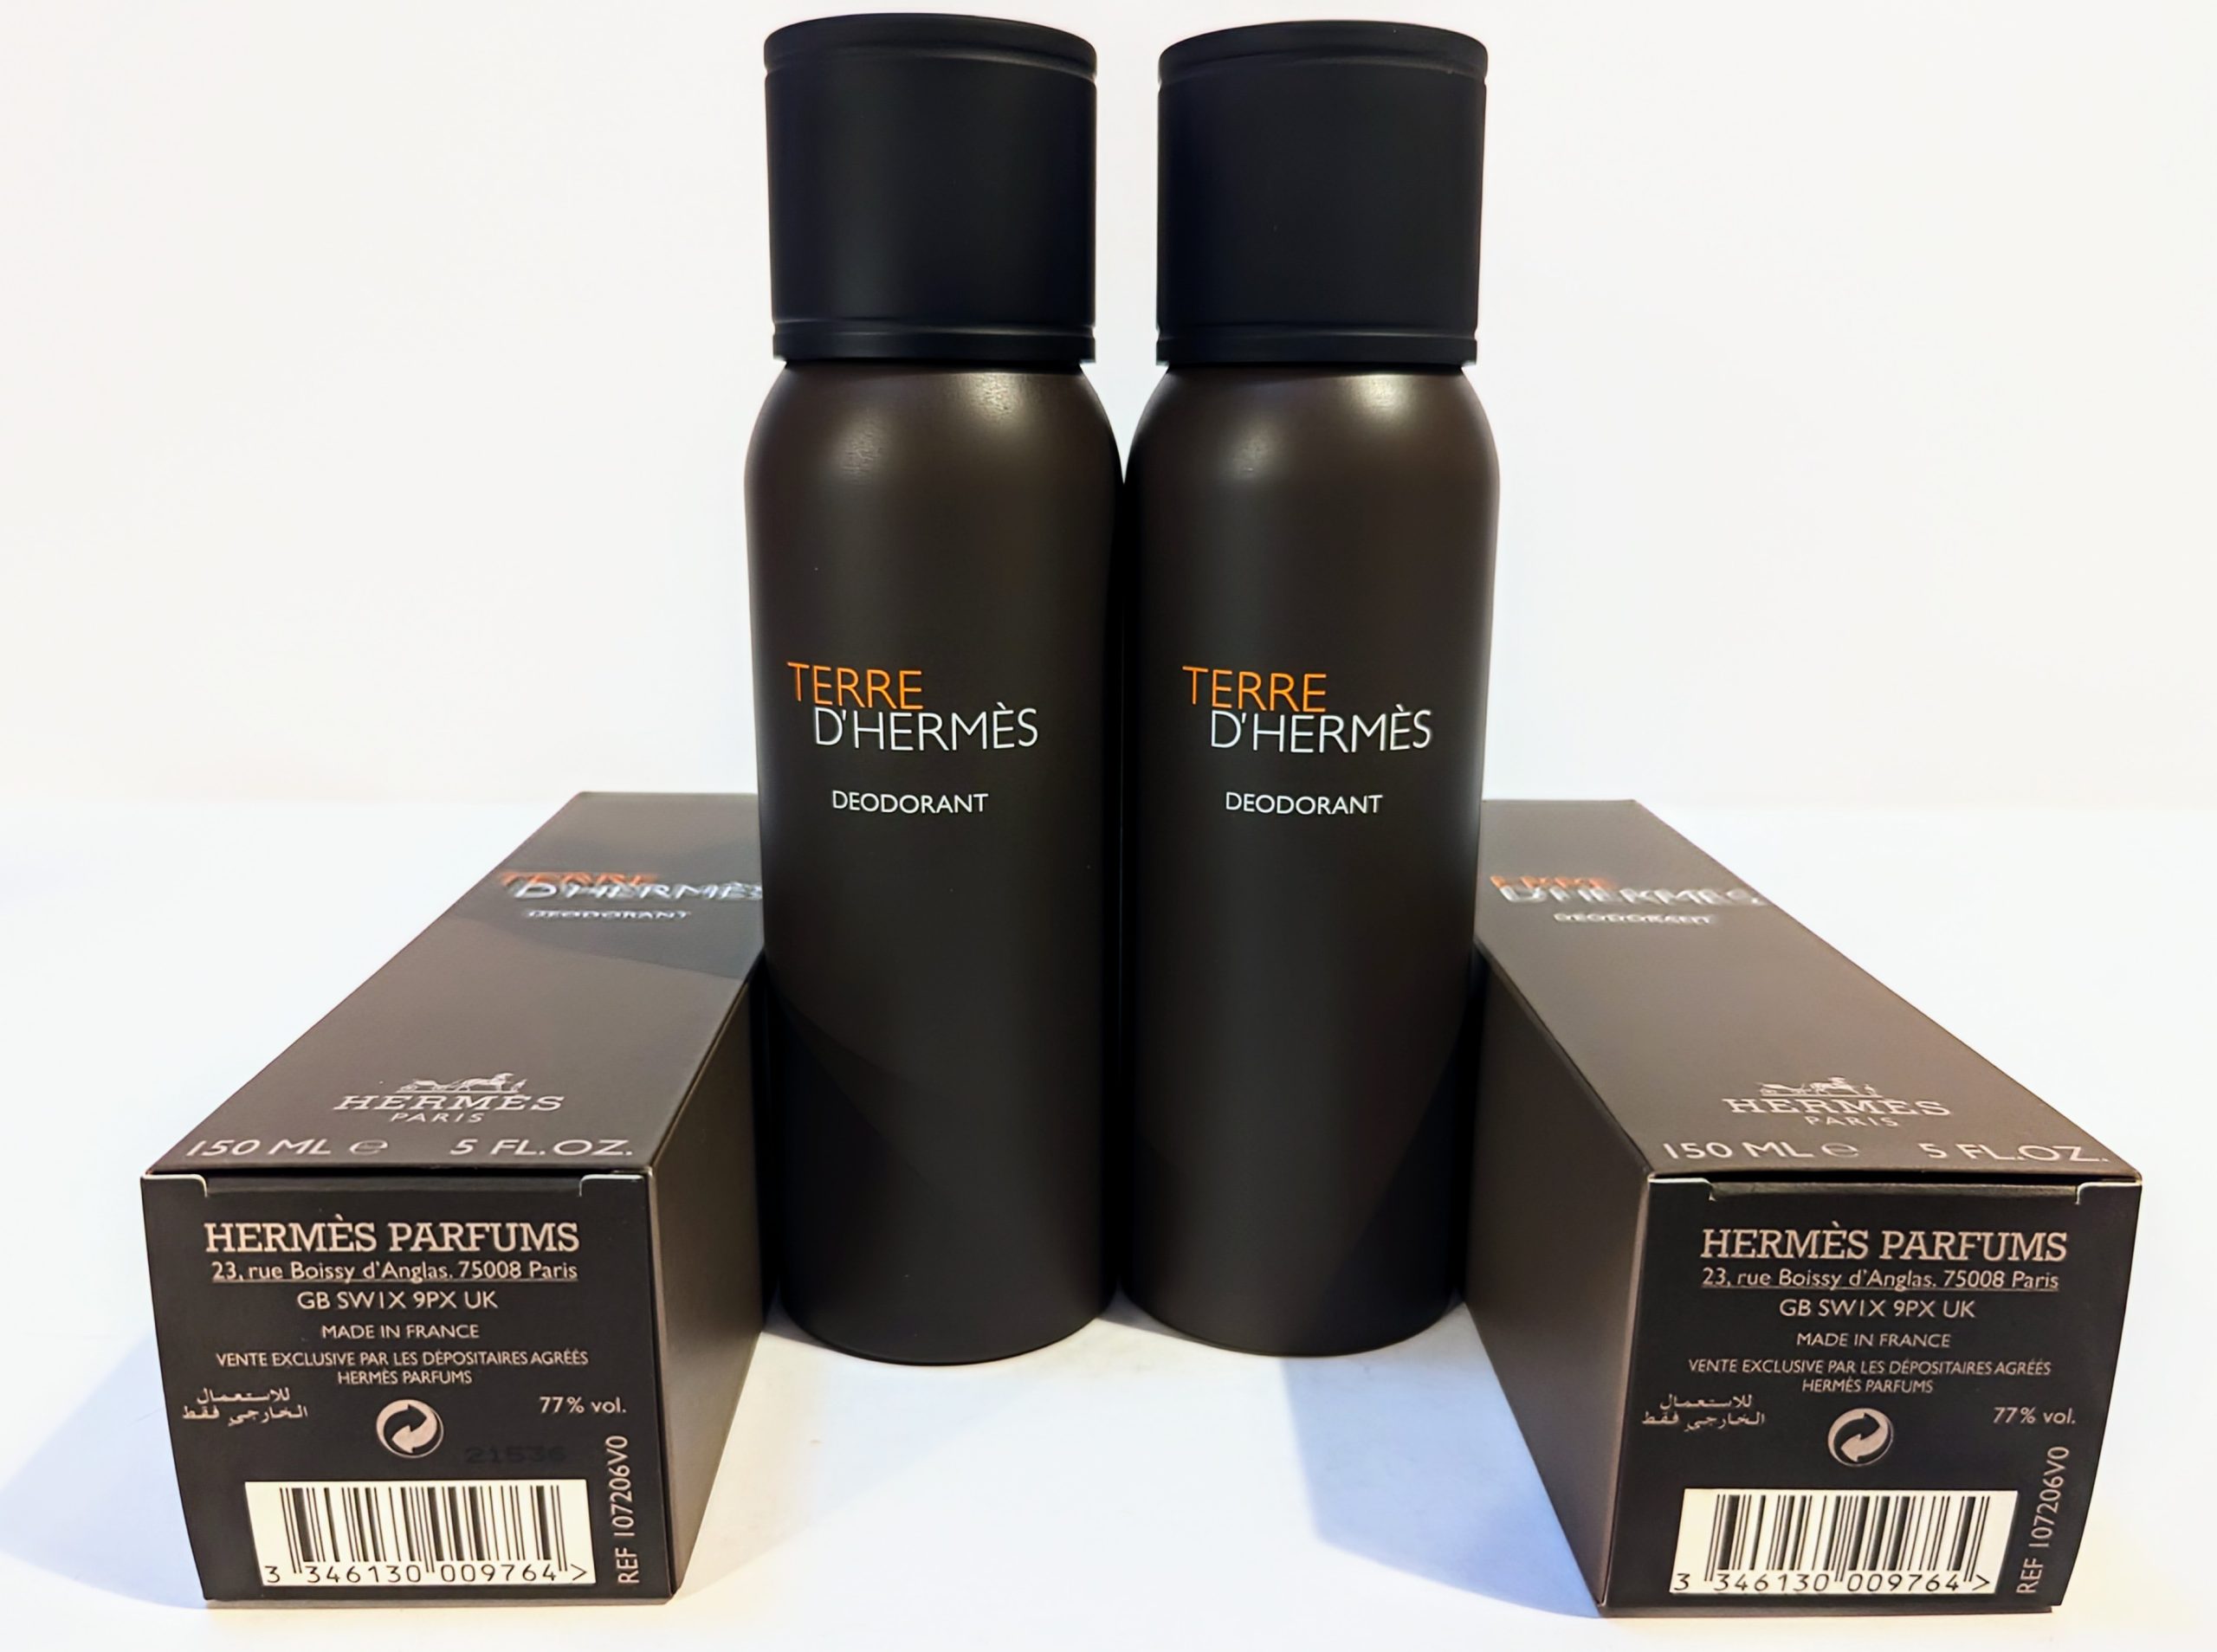 Two black bottles of Hermès Terre d’Hermès deodorant are placed upright between their boxes. The text on the bottles and boxes describes the product details.